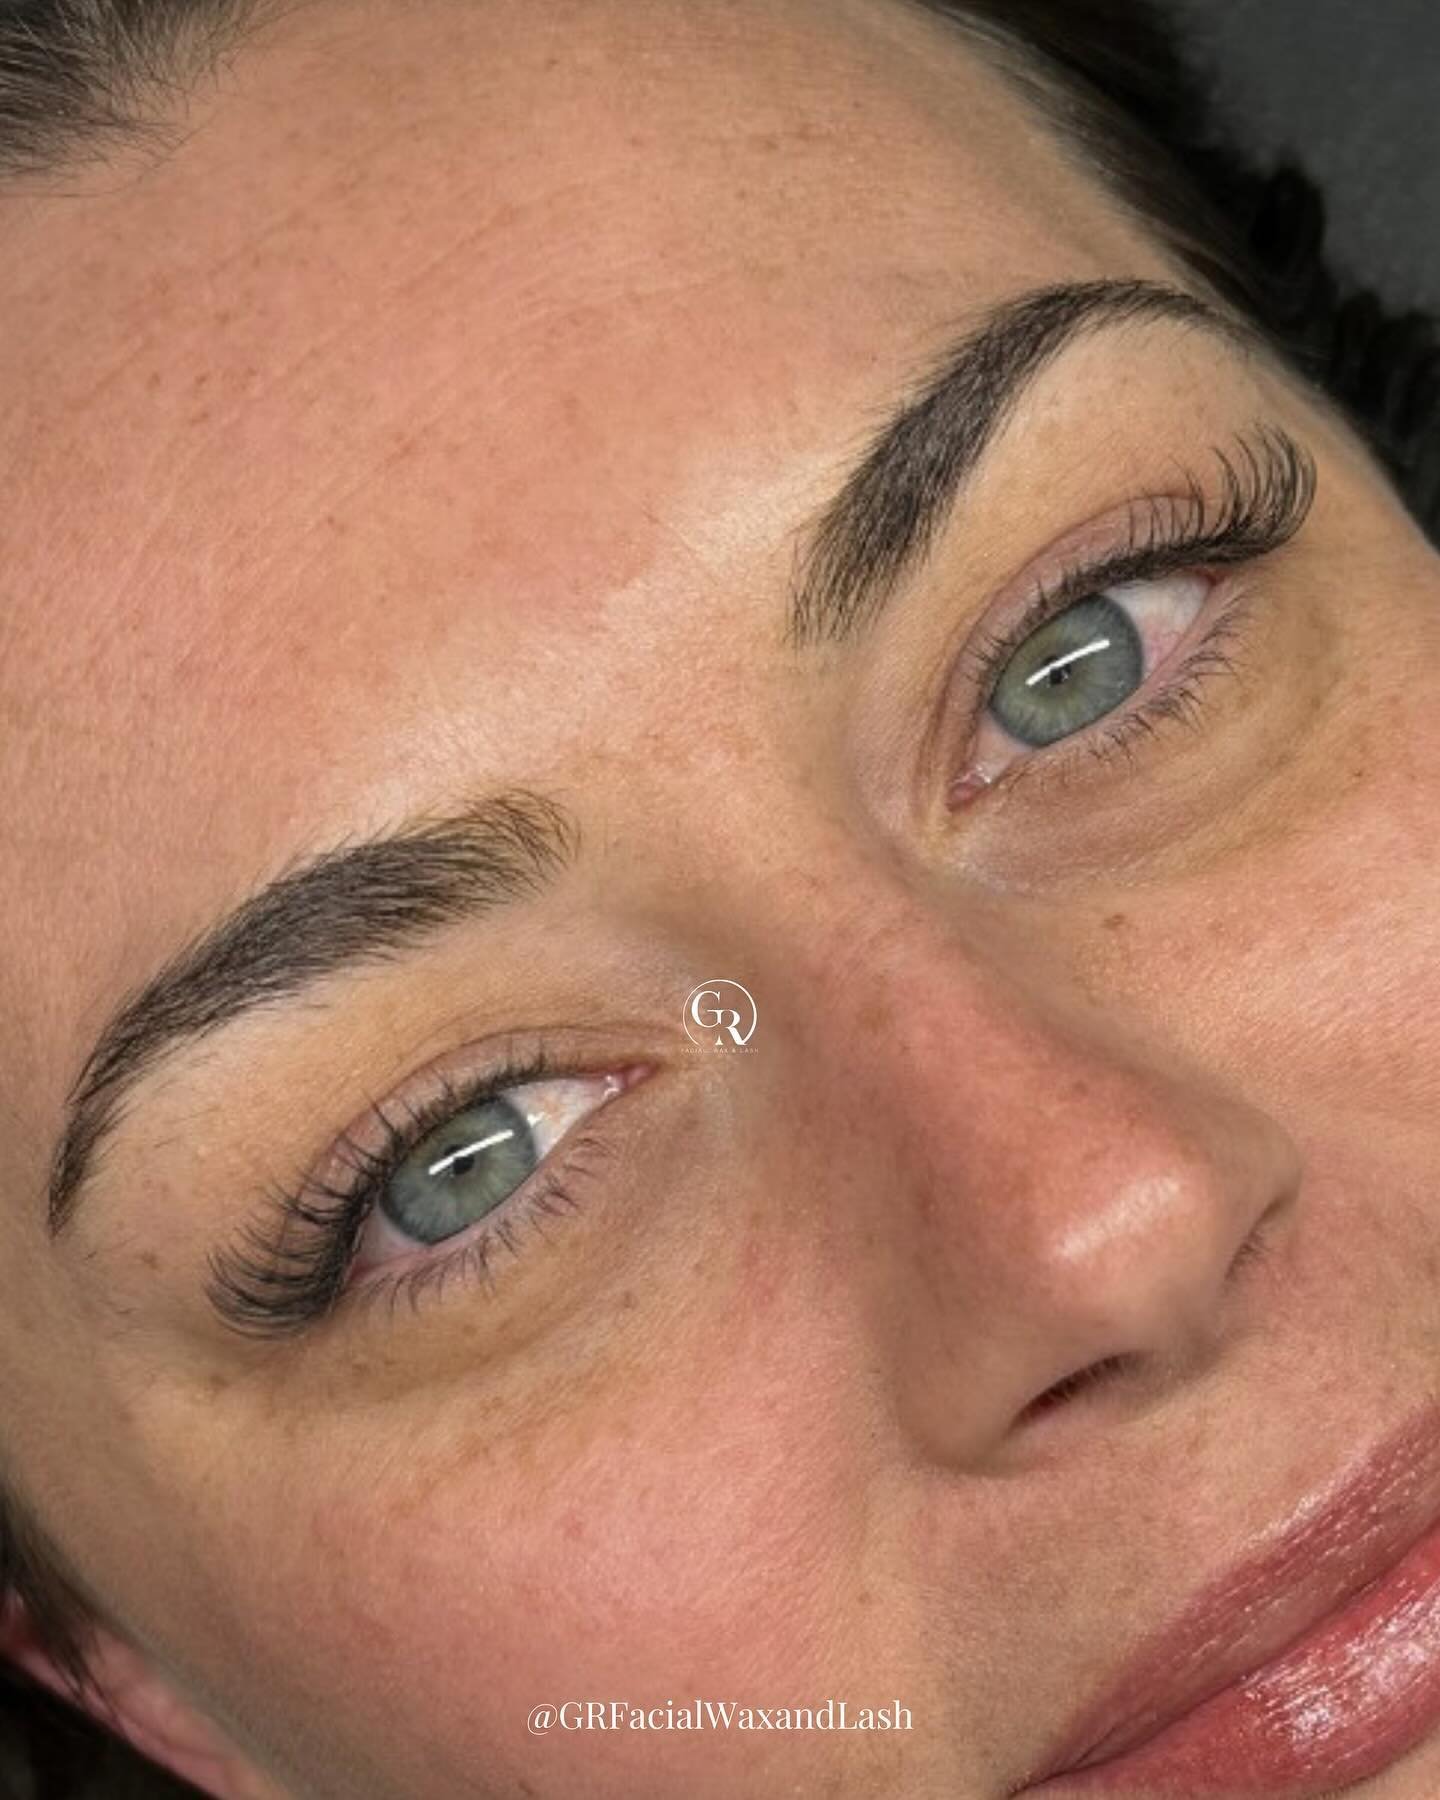 Transformations that speak volumes! Swipe through to witness the magic of our lash services. Her reaction says it all &ndash; it&rsquo;s not just about lashes, it&rsquo;s about the joy of feeling effortlessly fabulous! Ready to start your own lash jo